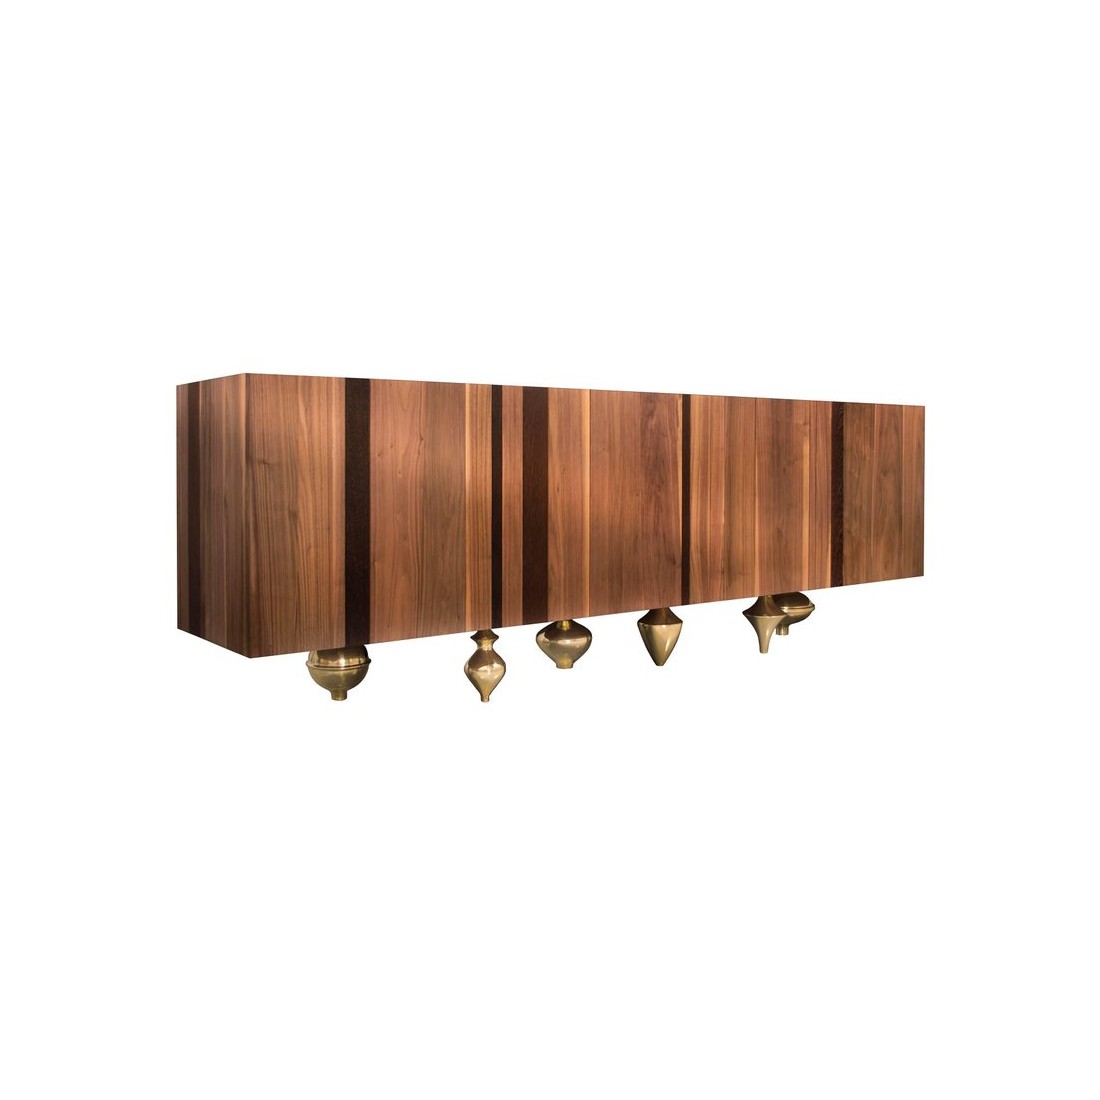 Р‘СѓС„РµС‚ Il Pezzo 1 Credenza modern buffet in solid walnut and wenge with marble top